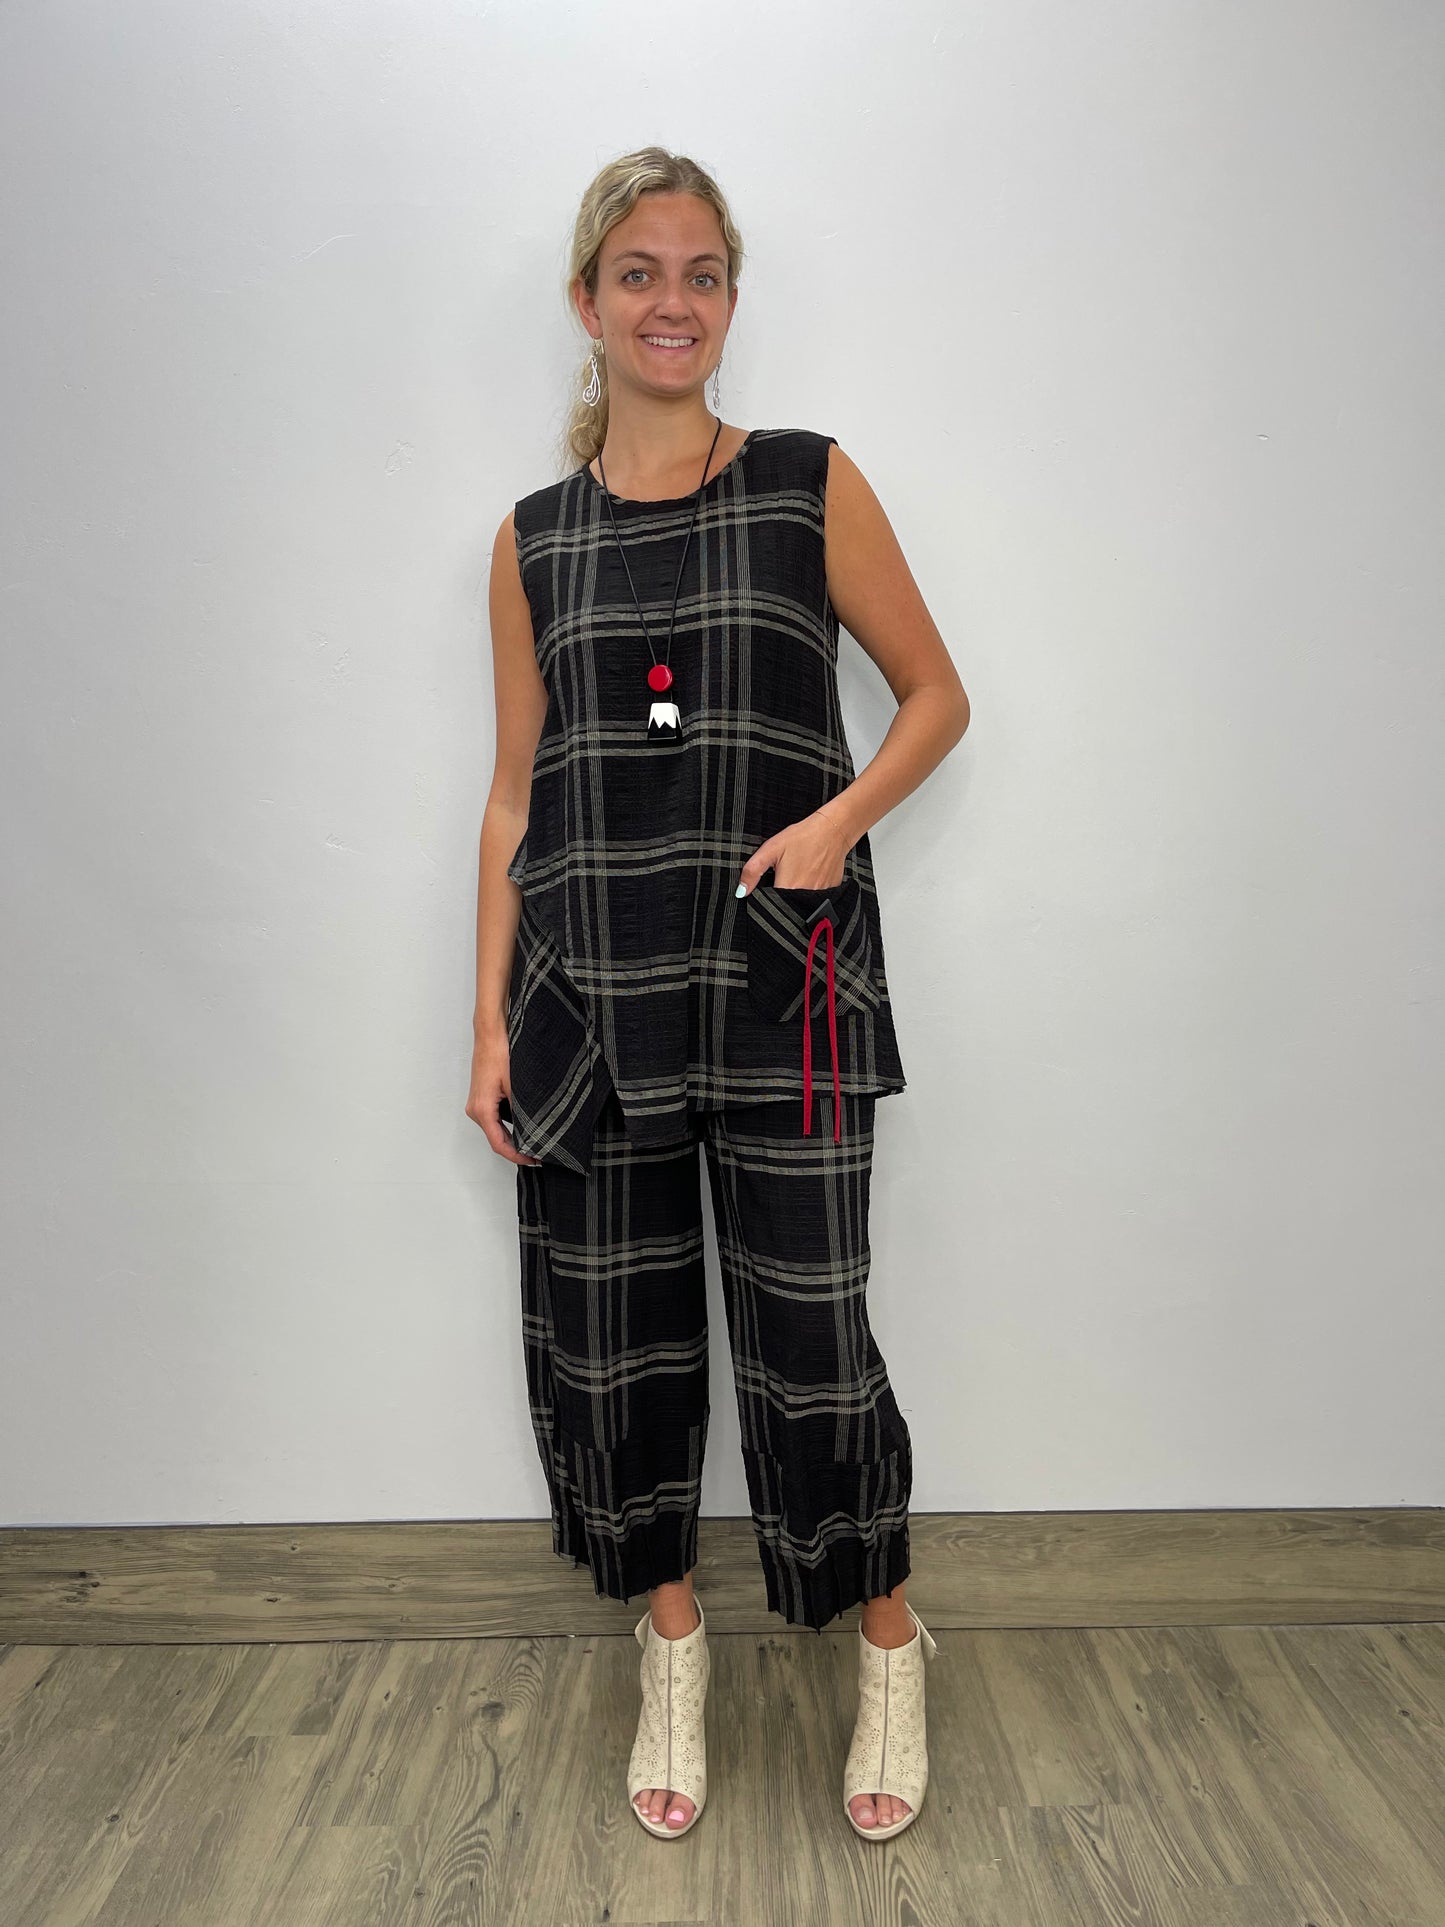 Load image into Gallery viewer, Black and Khaki Plaid Pants
